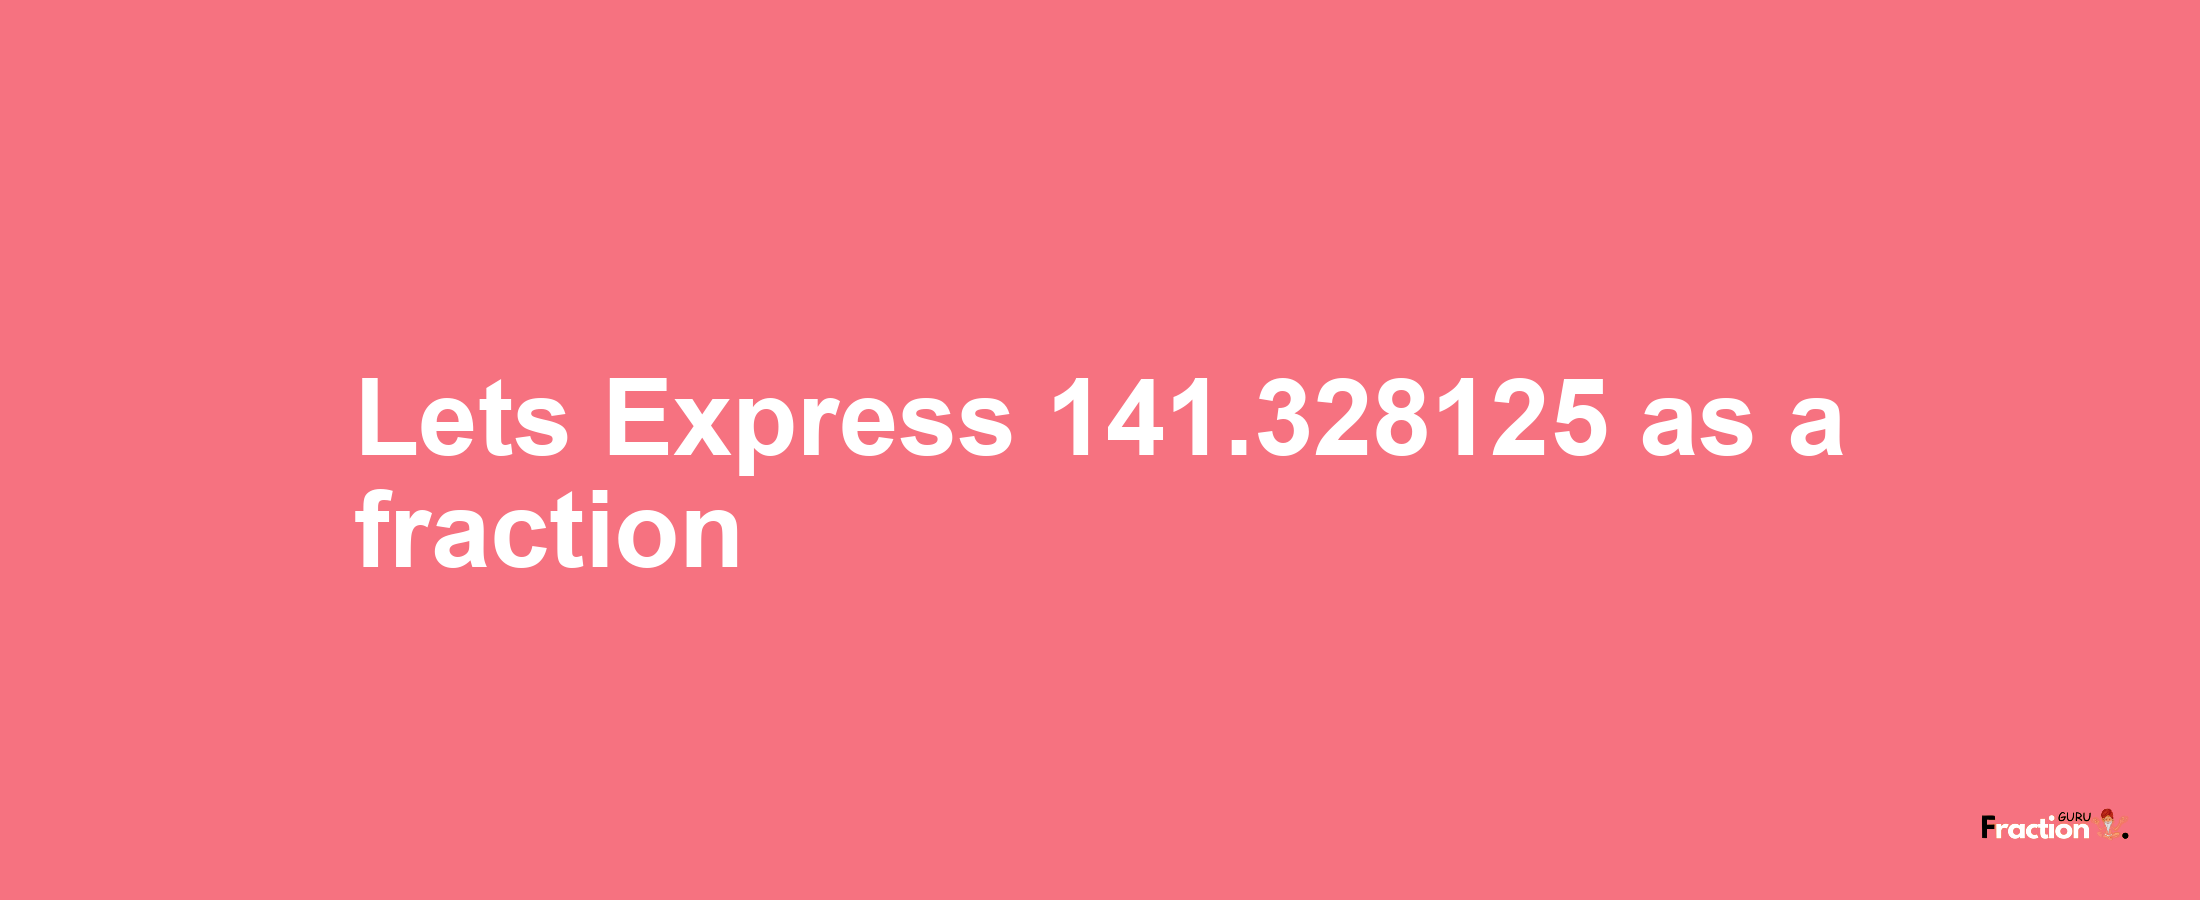 Lets Express 141.328125 as afraction